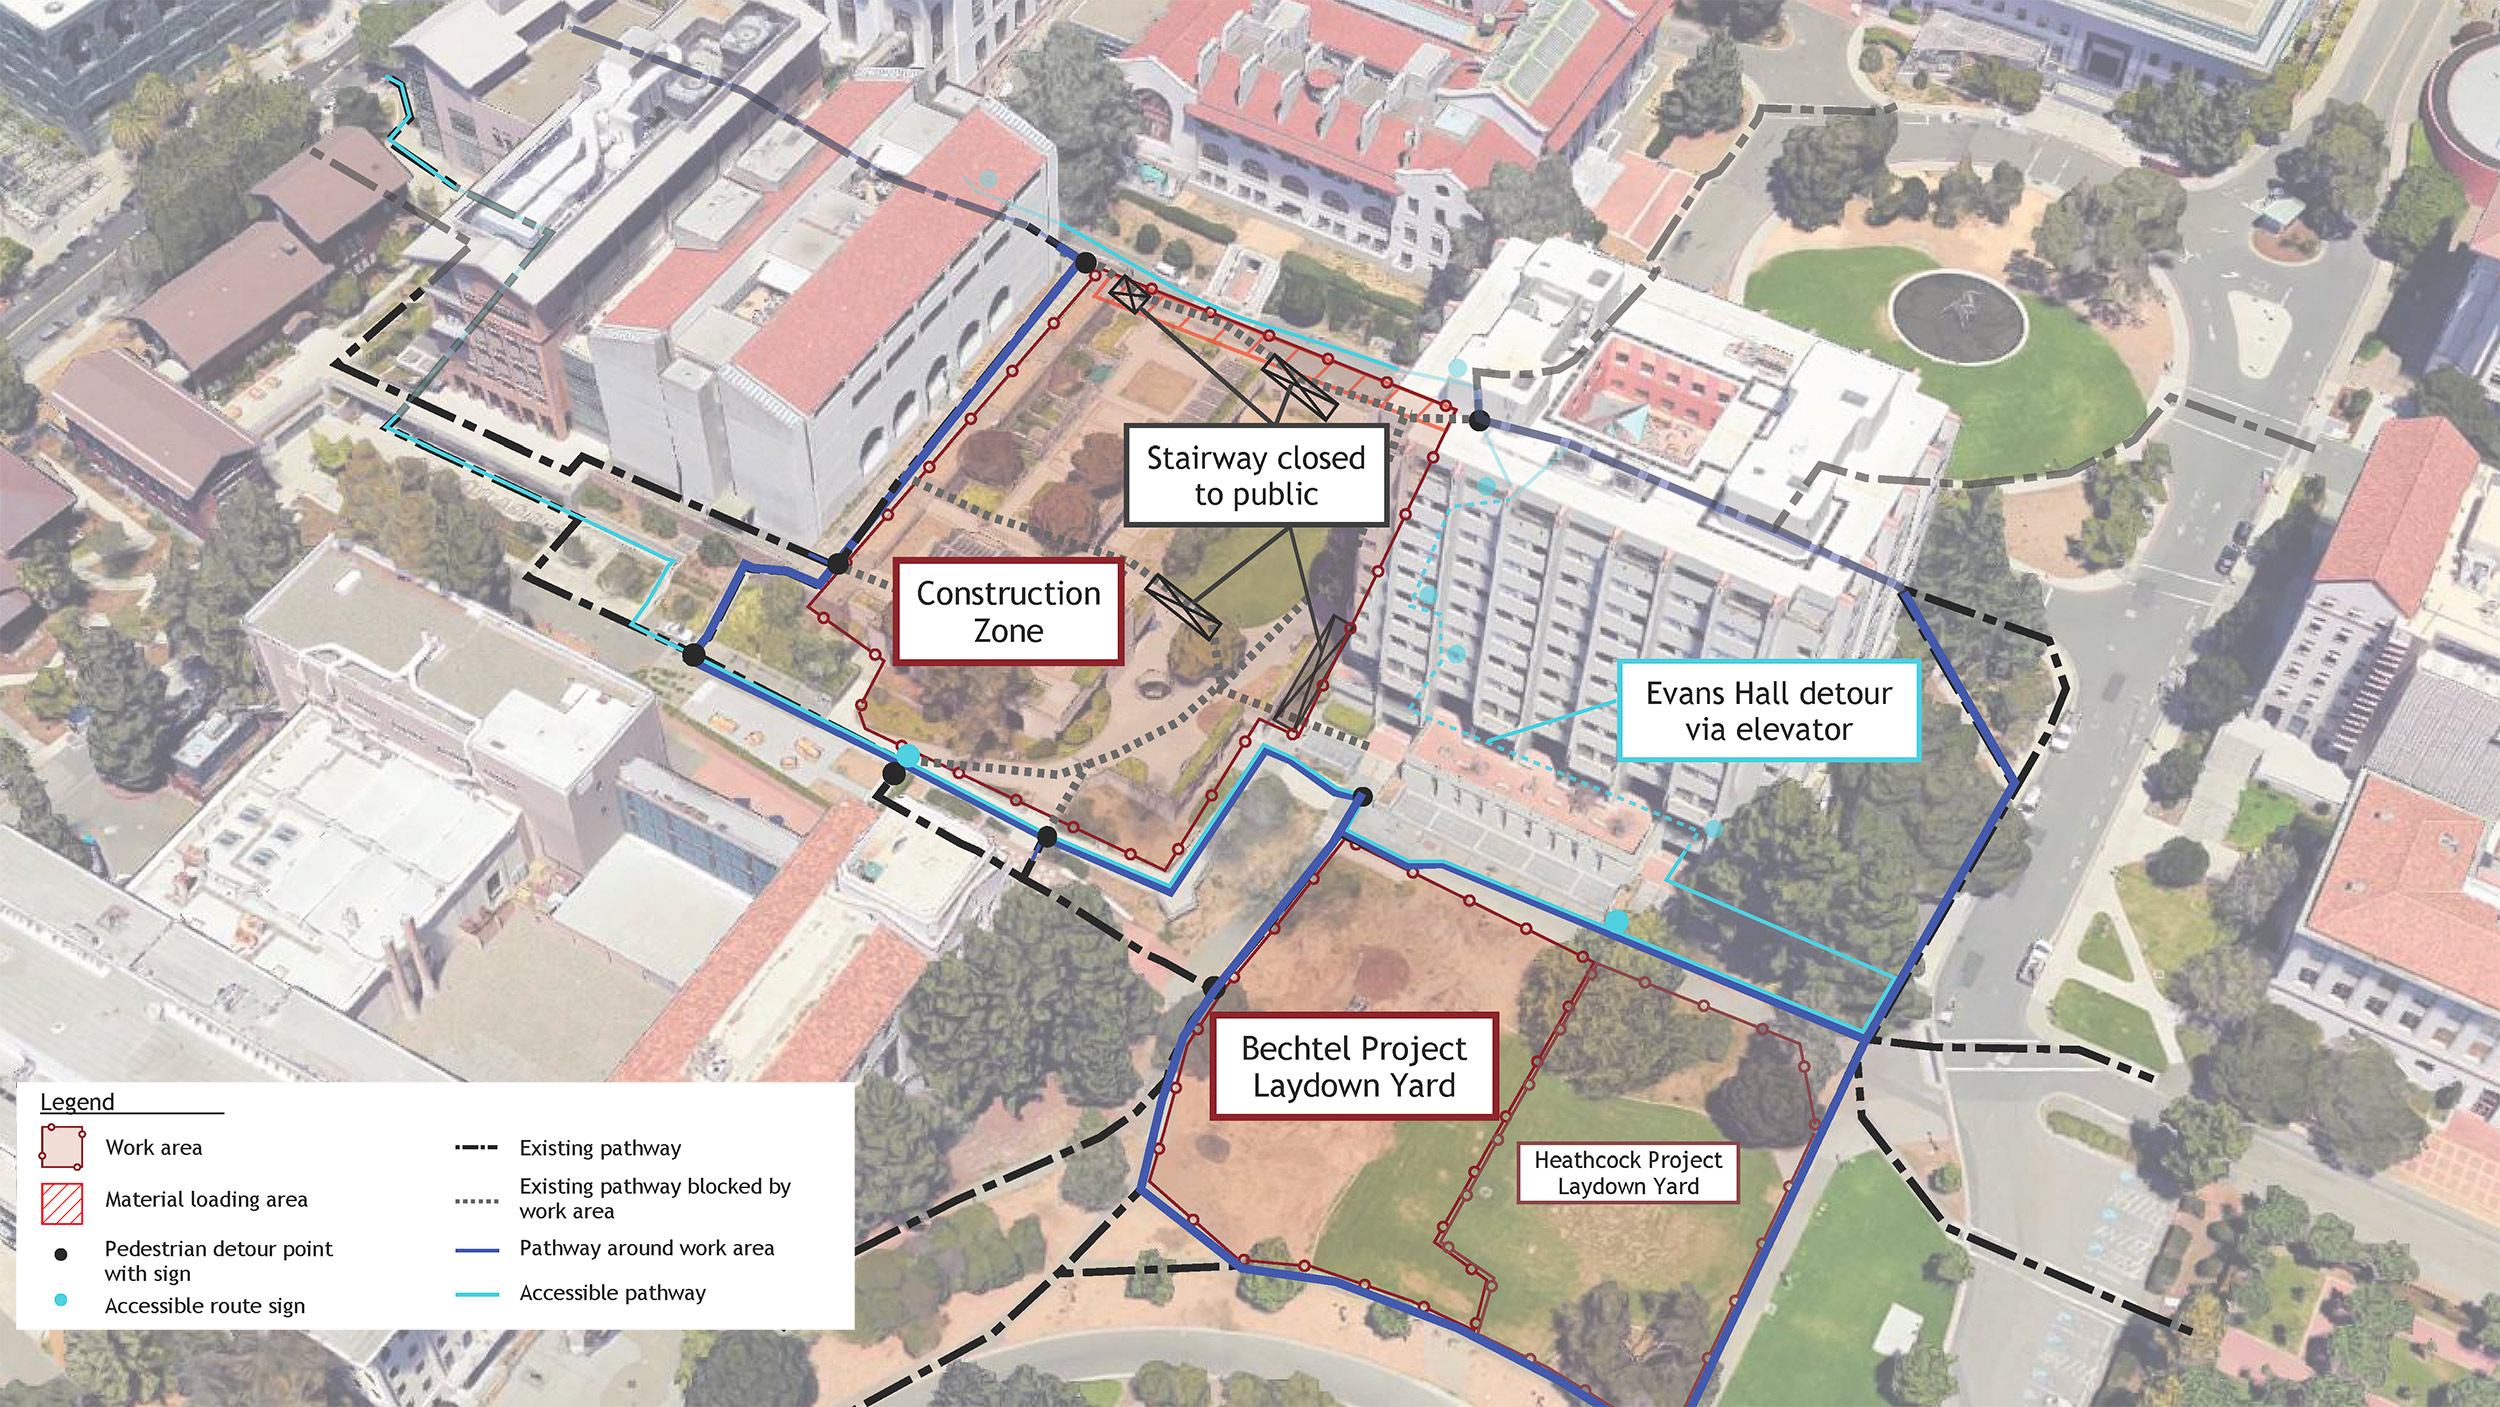 Birdseye view of Engineering Center construction zone, showing fenced areas, pathways (existing and modified) and accessible routes.